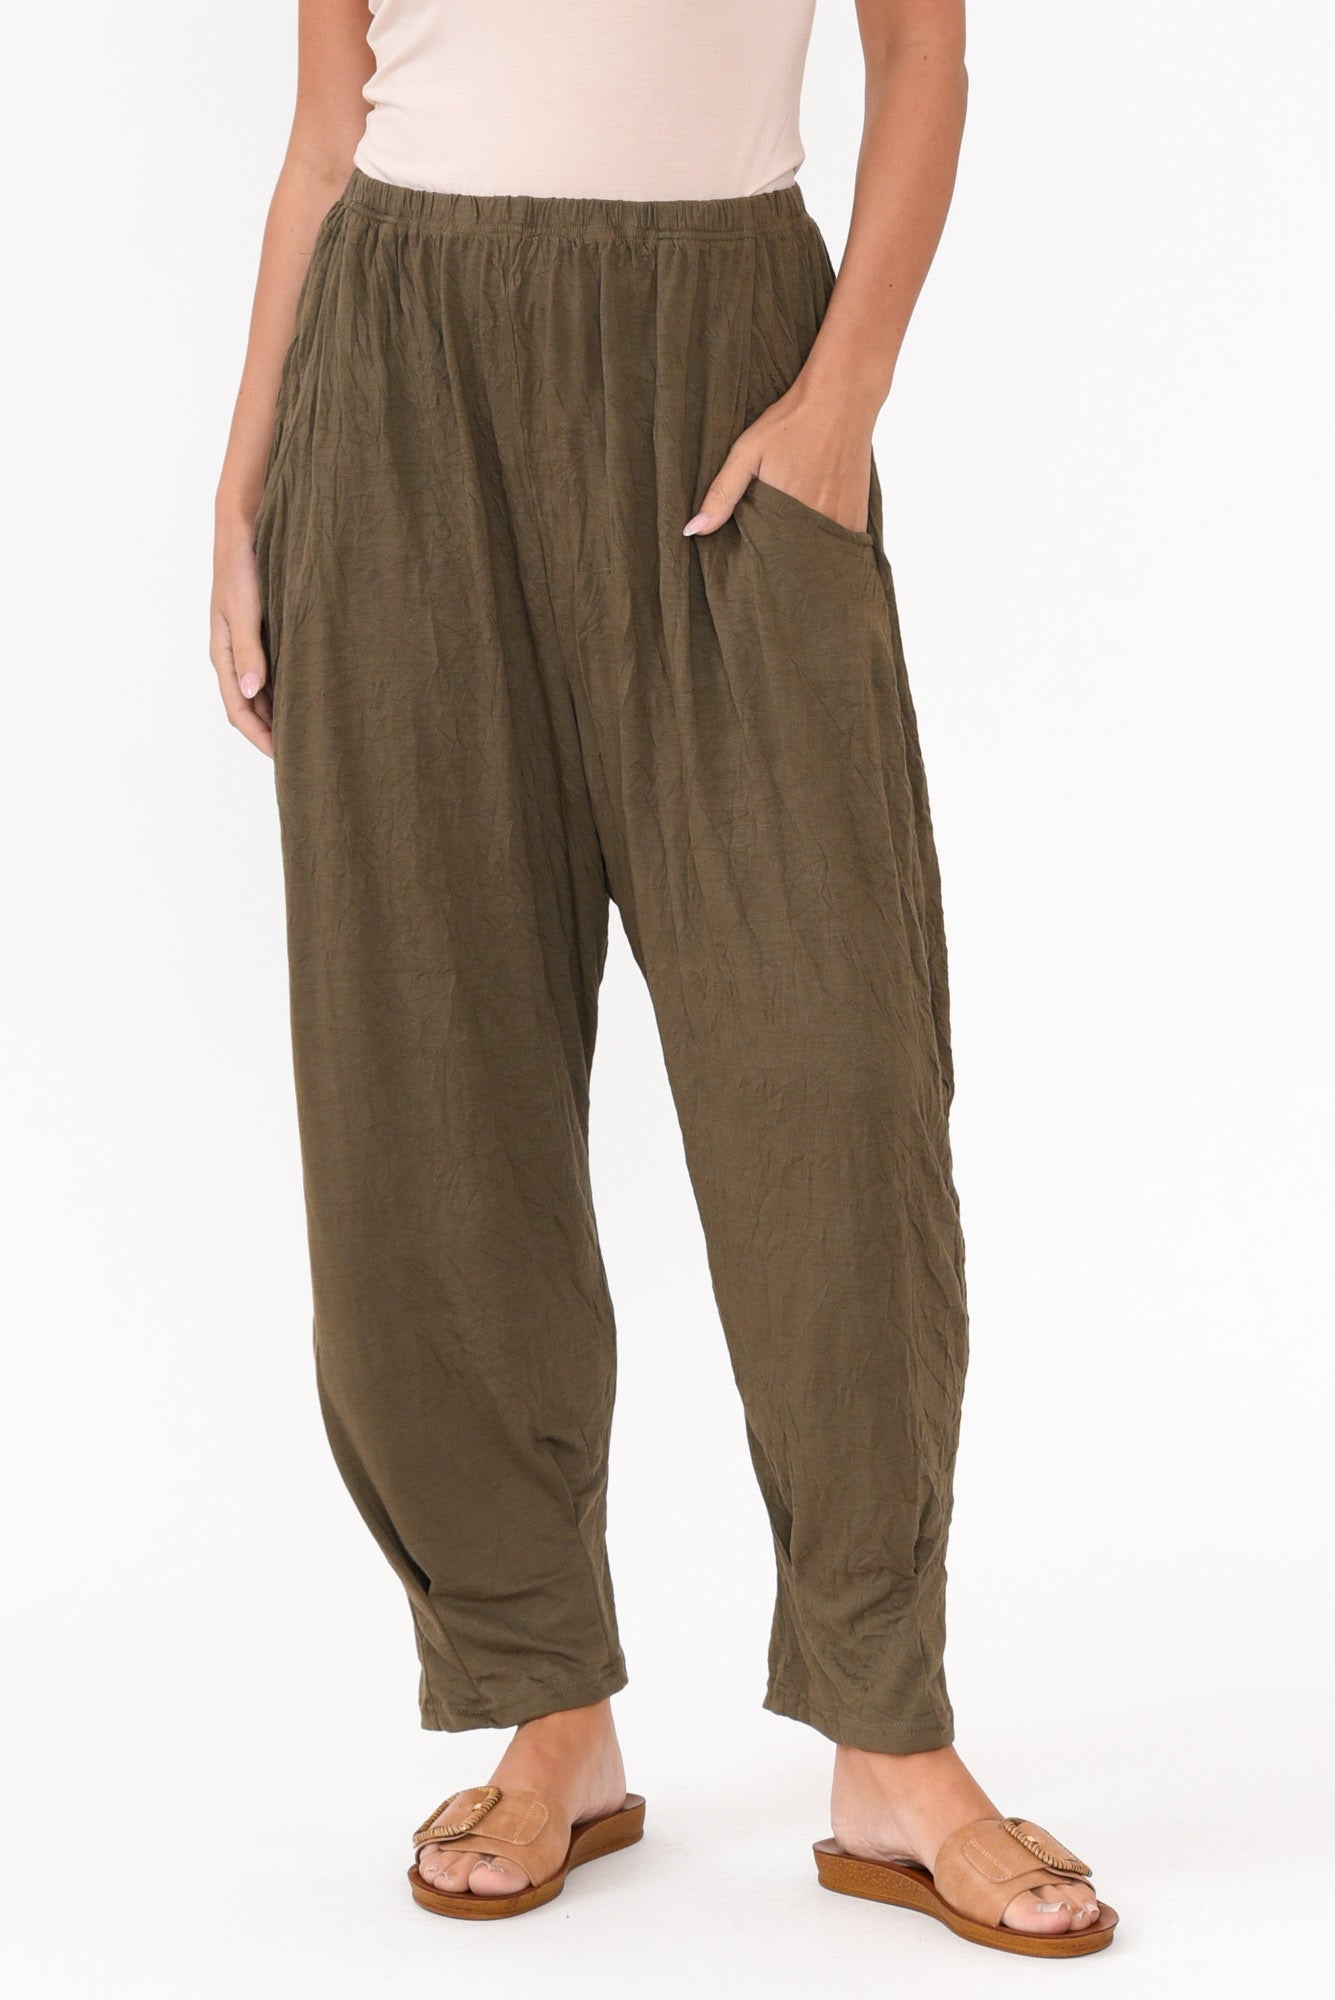 Free People Movement Harem Pants Rise To The Sun Slouchy Loose Fit Tan XS  NEW  eBay